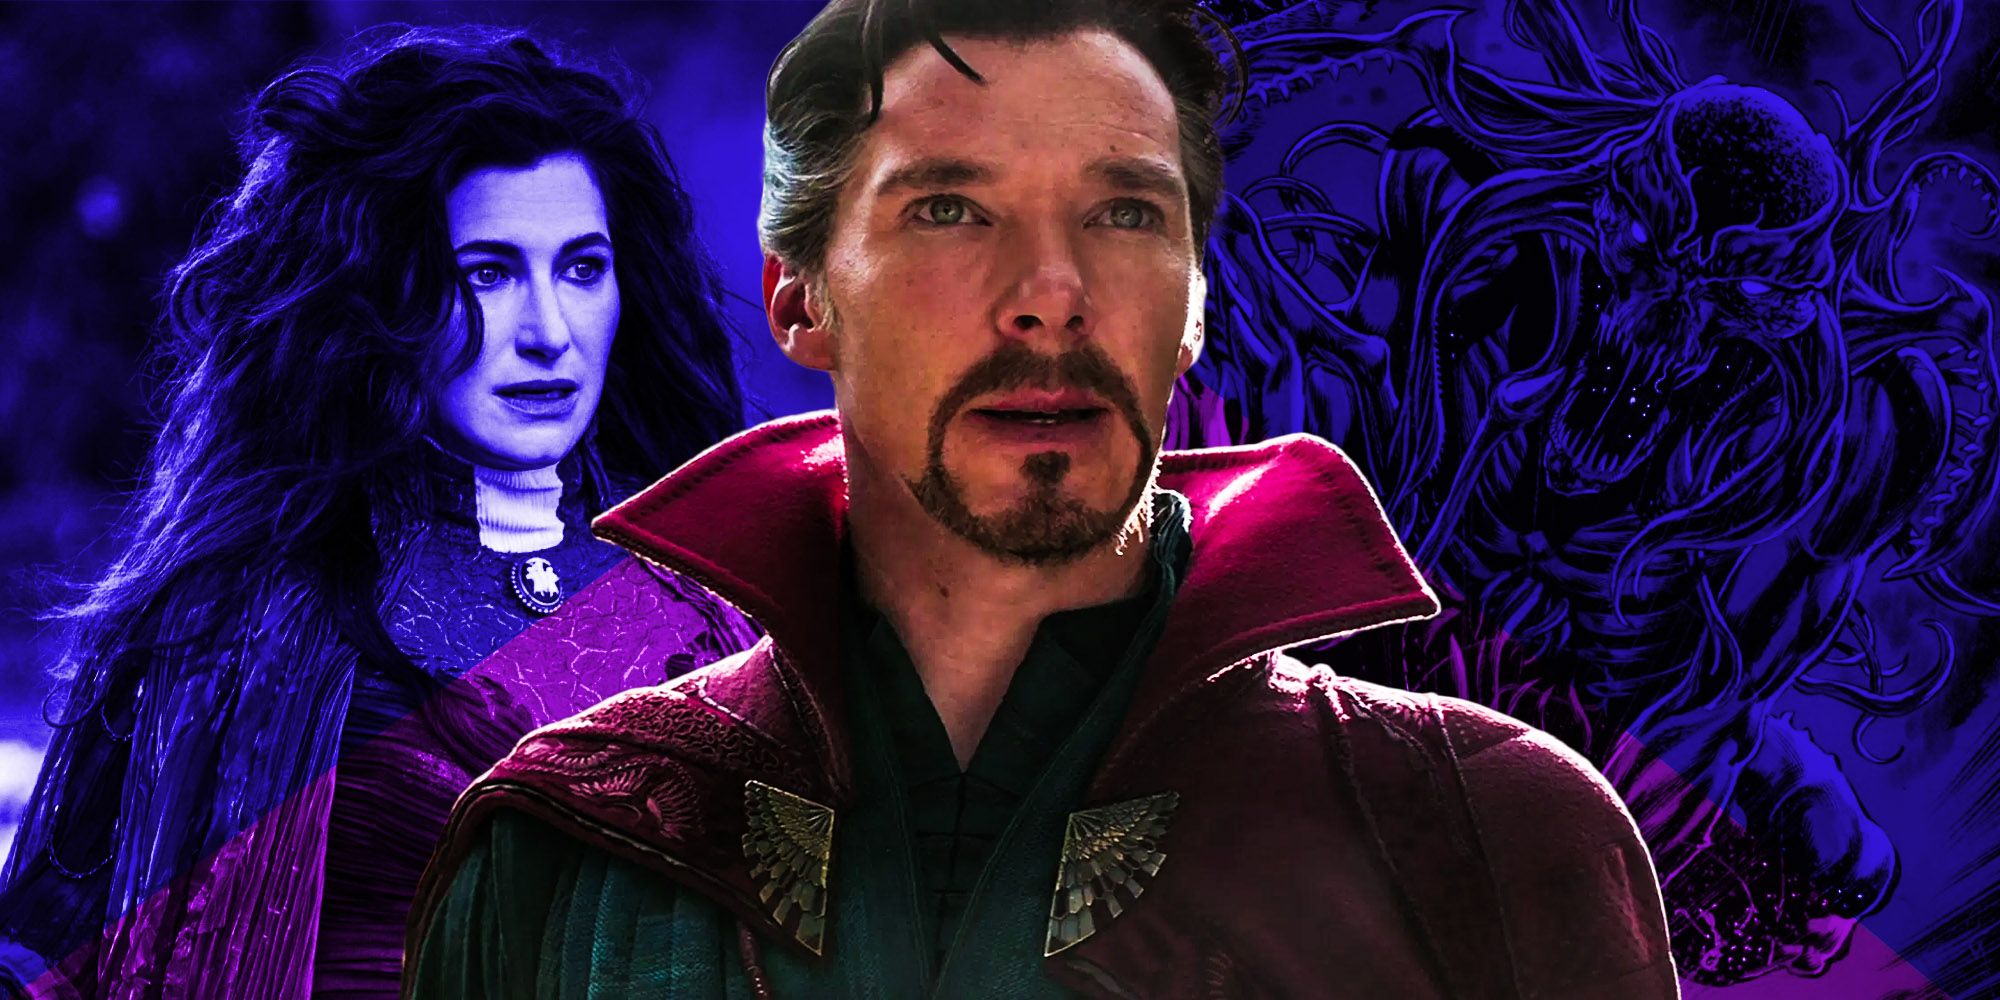 split image of Agatha Harkness and Doctor Strange from MCU and Chthon from Marvel Comics